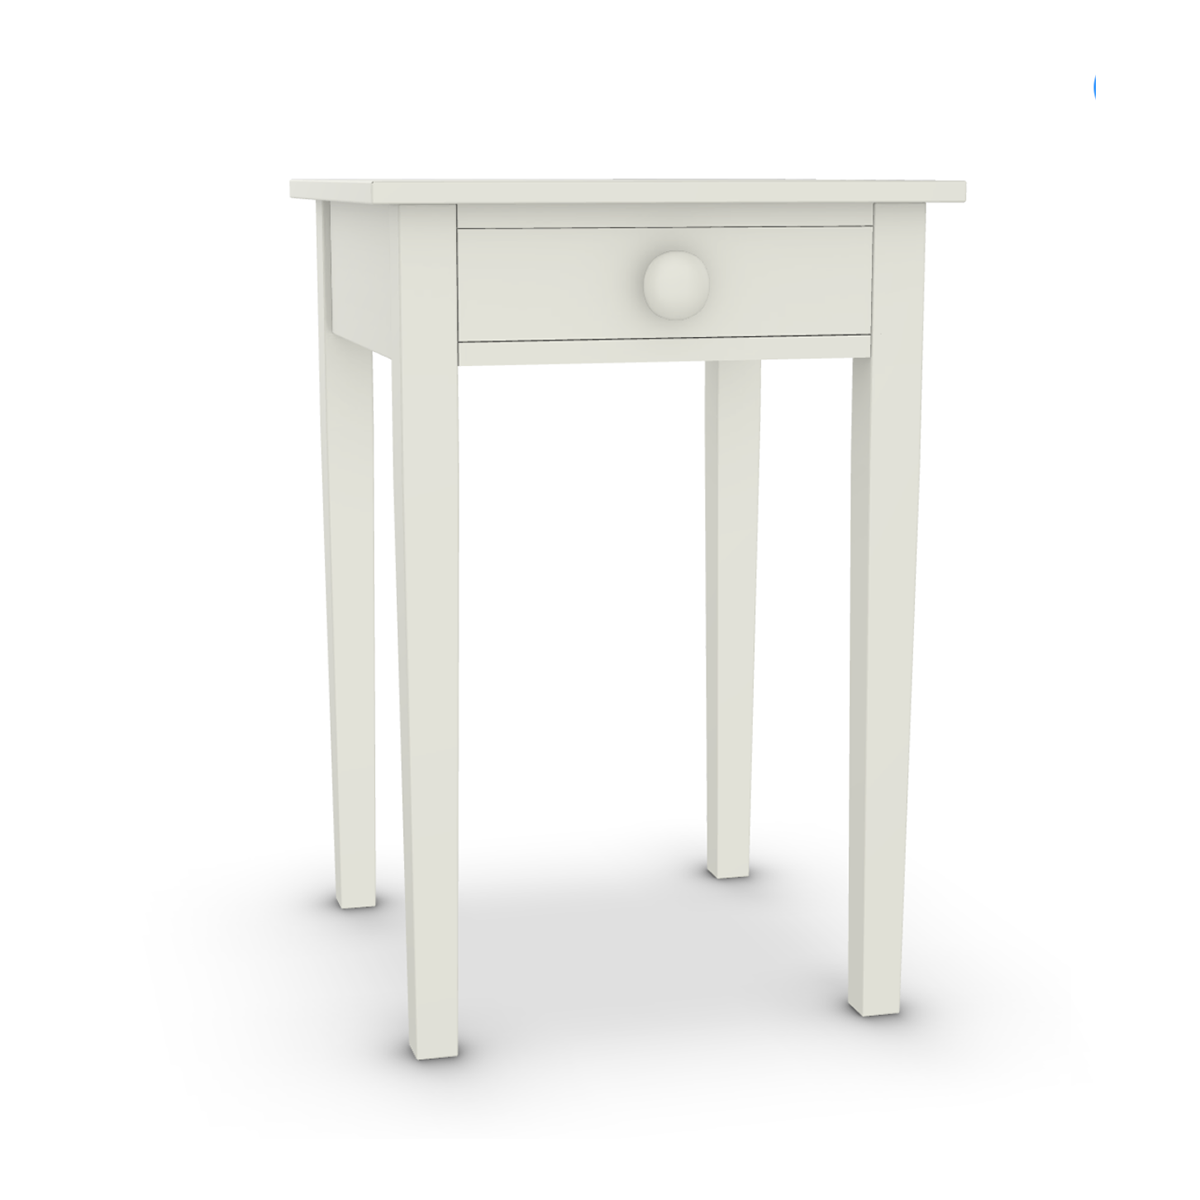 addy-side-table-MLK-2.png